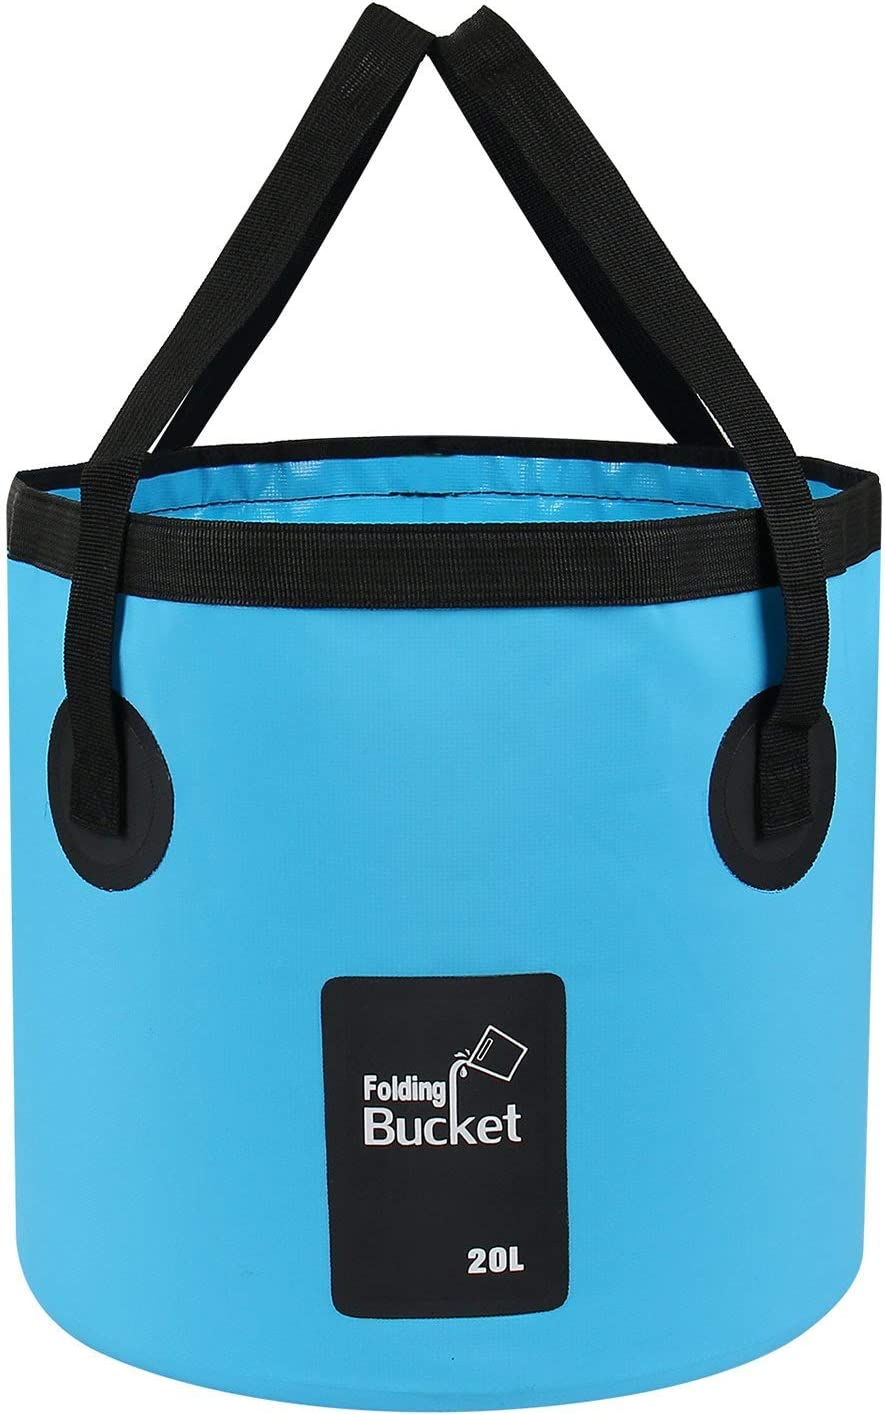 20L Litre Blue Bucket Fishing Camping Hiking Portable Folding Bucket Collapsible Water Storage Container Bag